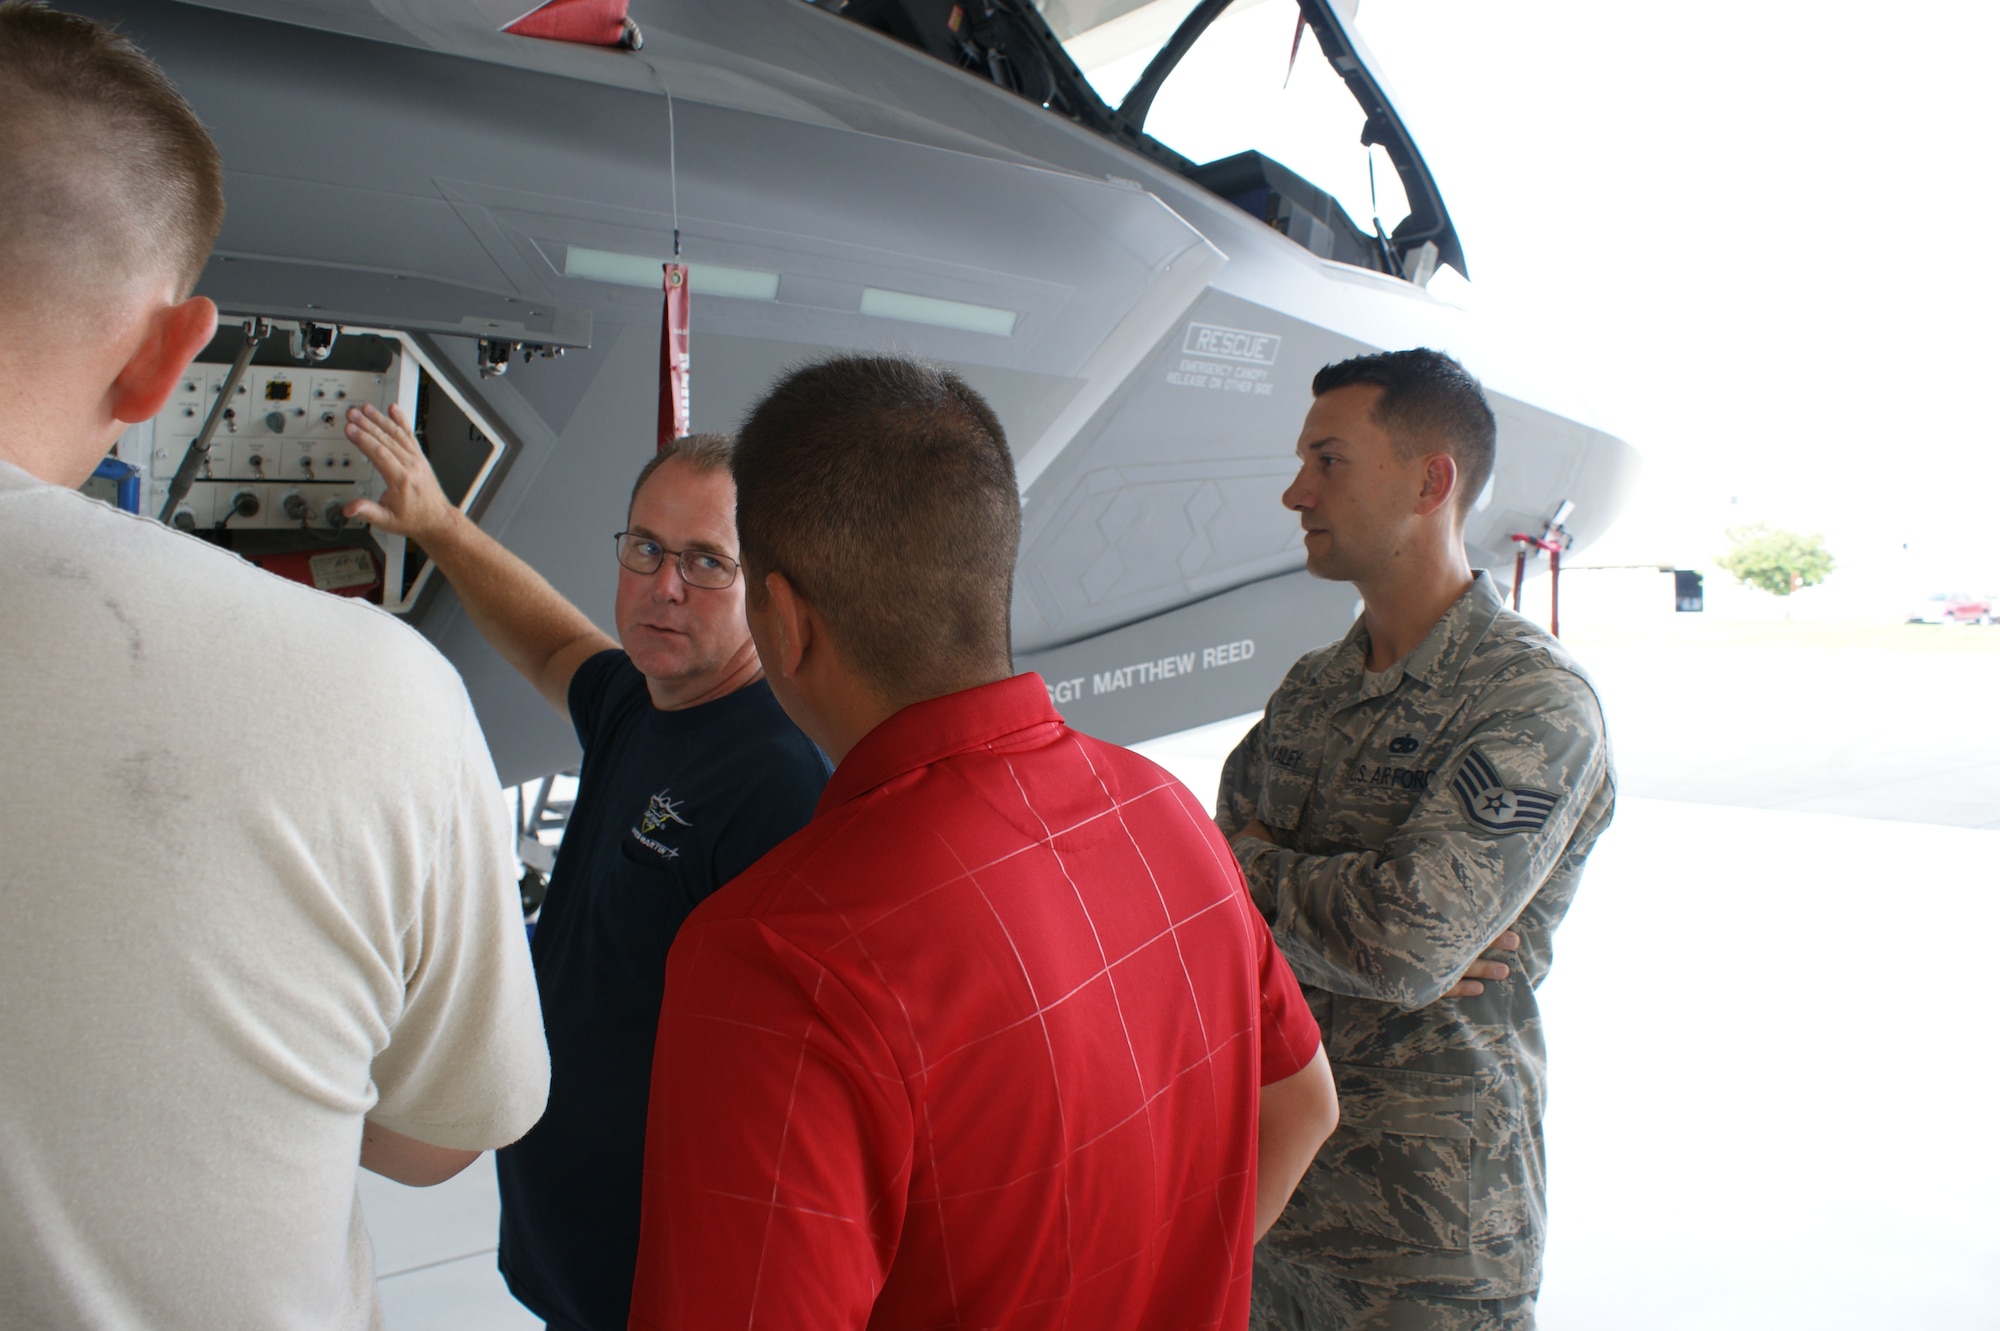 Students discuss a training problem during F-35 Lightning II joint strike fighter training as Staff Sgt. Jeff Kakaley (right), F-35 crew chief instructor, observes during training at Eglin Air Force Base, Fla., Jul. 19, 2012.  The 372nd Training Squadron Detachment 19 at Eglin, part of the 982nd Training Group at Sheppard Air Force Base, trains both Air Force and Marines on F-35 maintenance. (U.S. Air Force photo/Dan Hawkins)